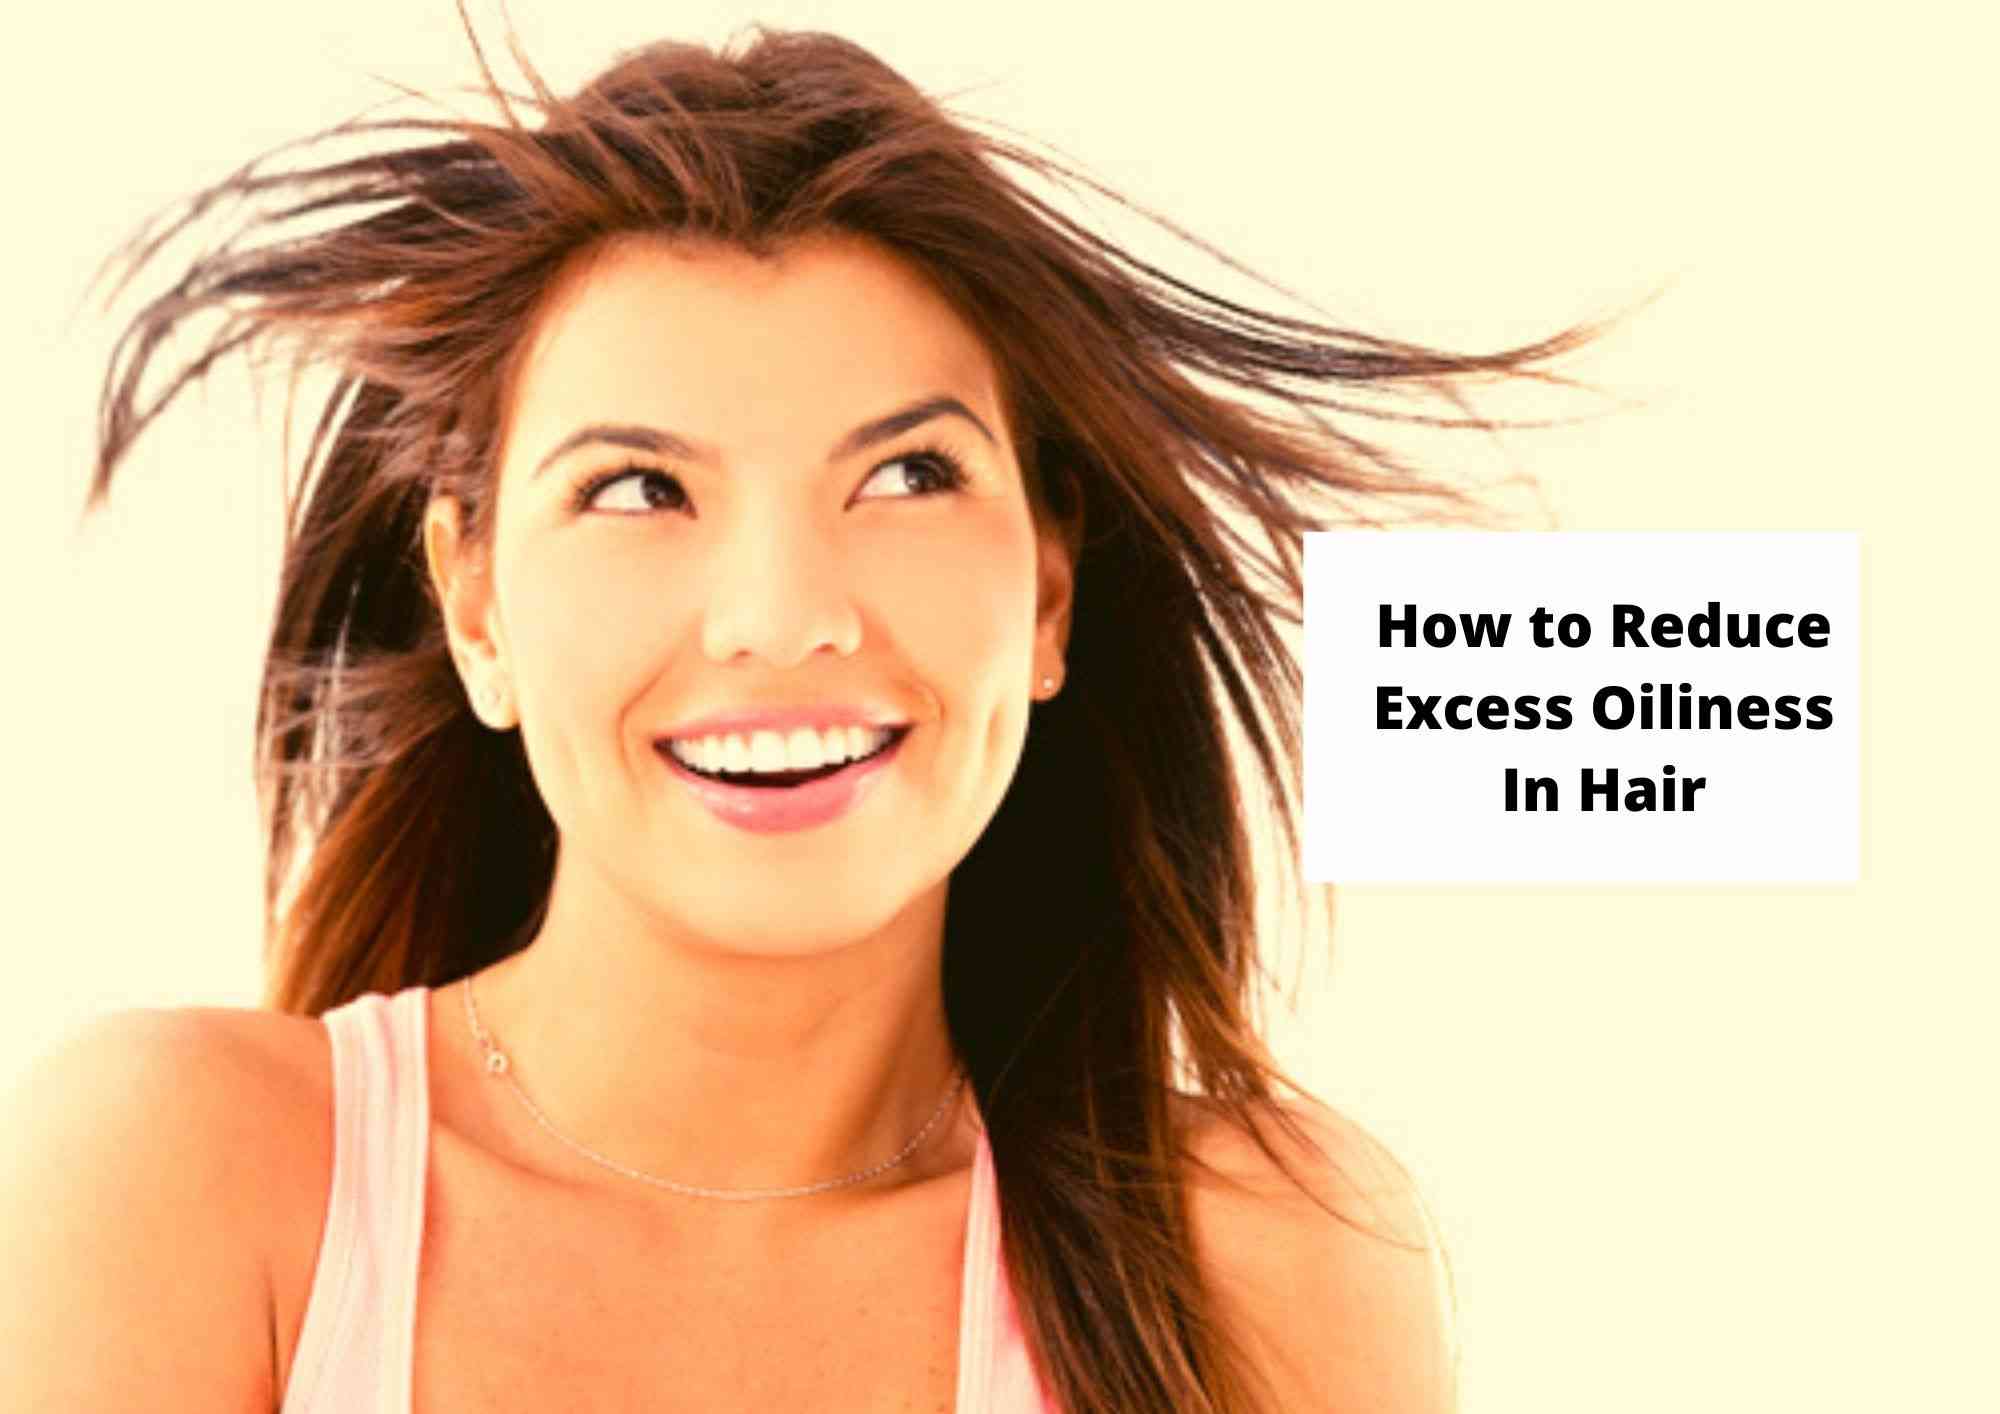 How to Reduce Excess Sebum Production in Your Hair